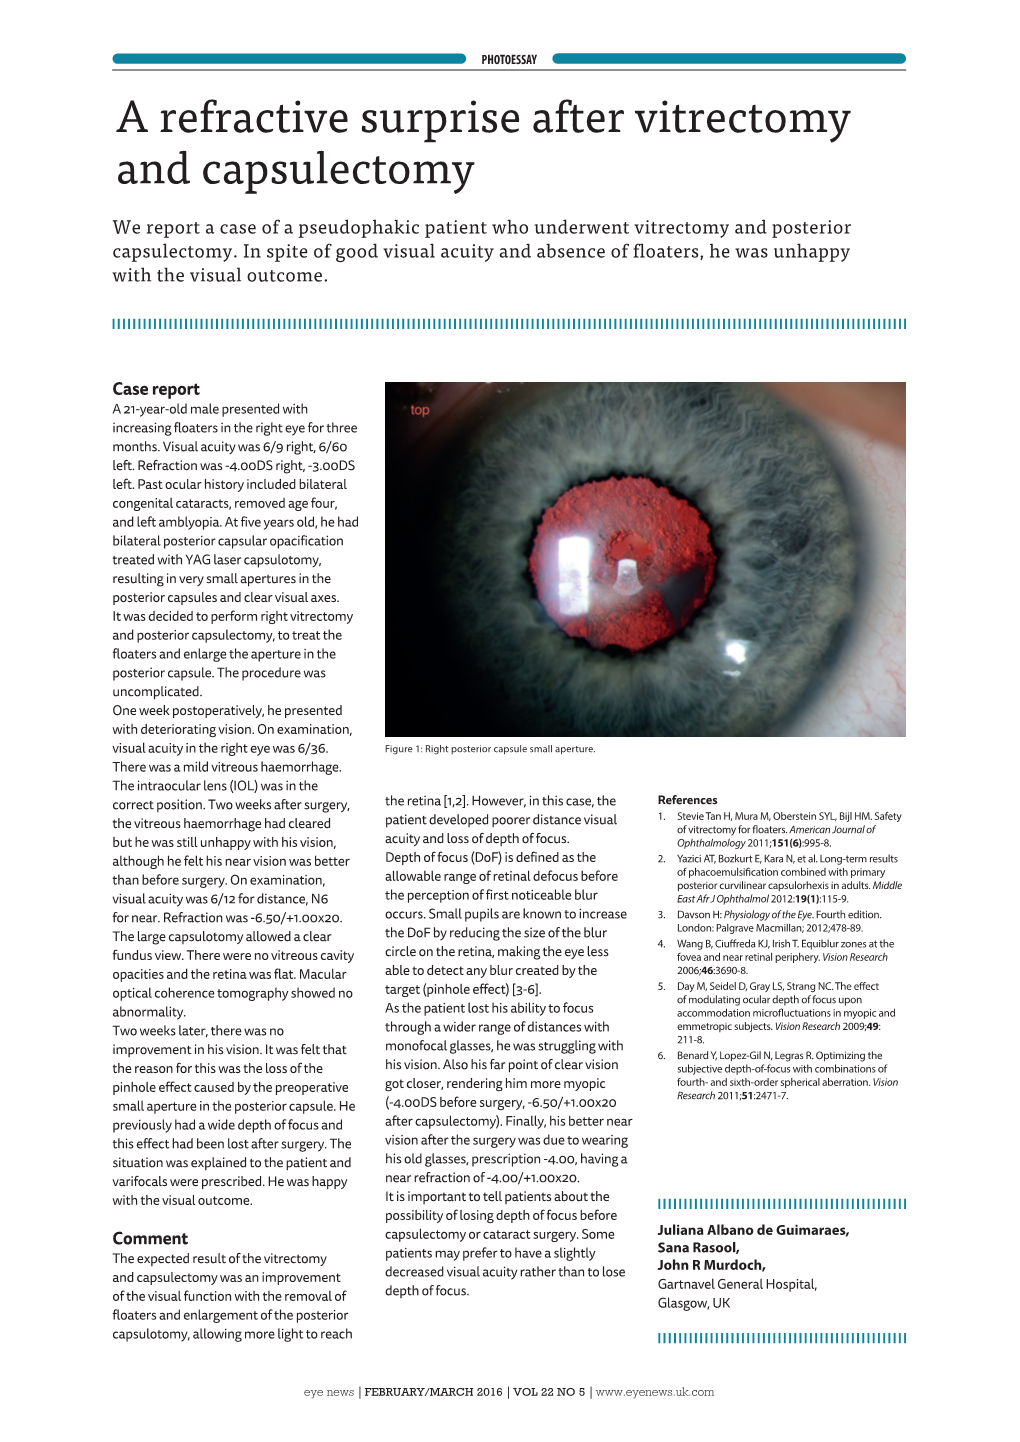 A Refractive Surprise After Vitrectomy and Capsulectomy